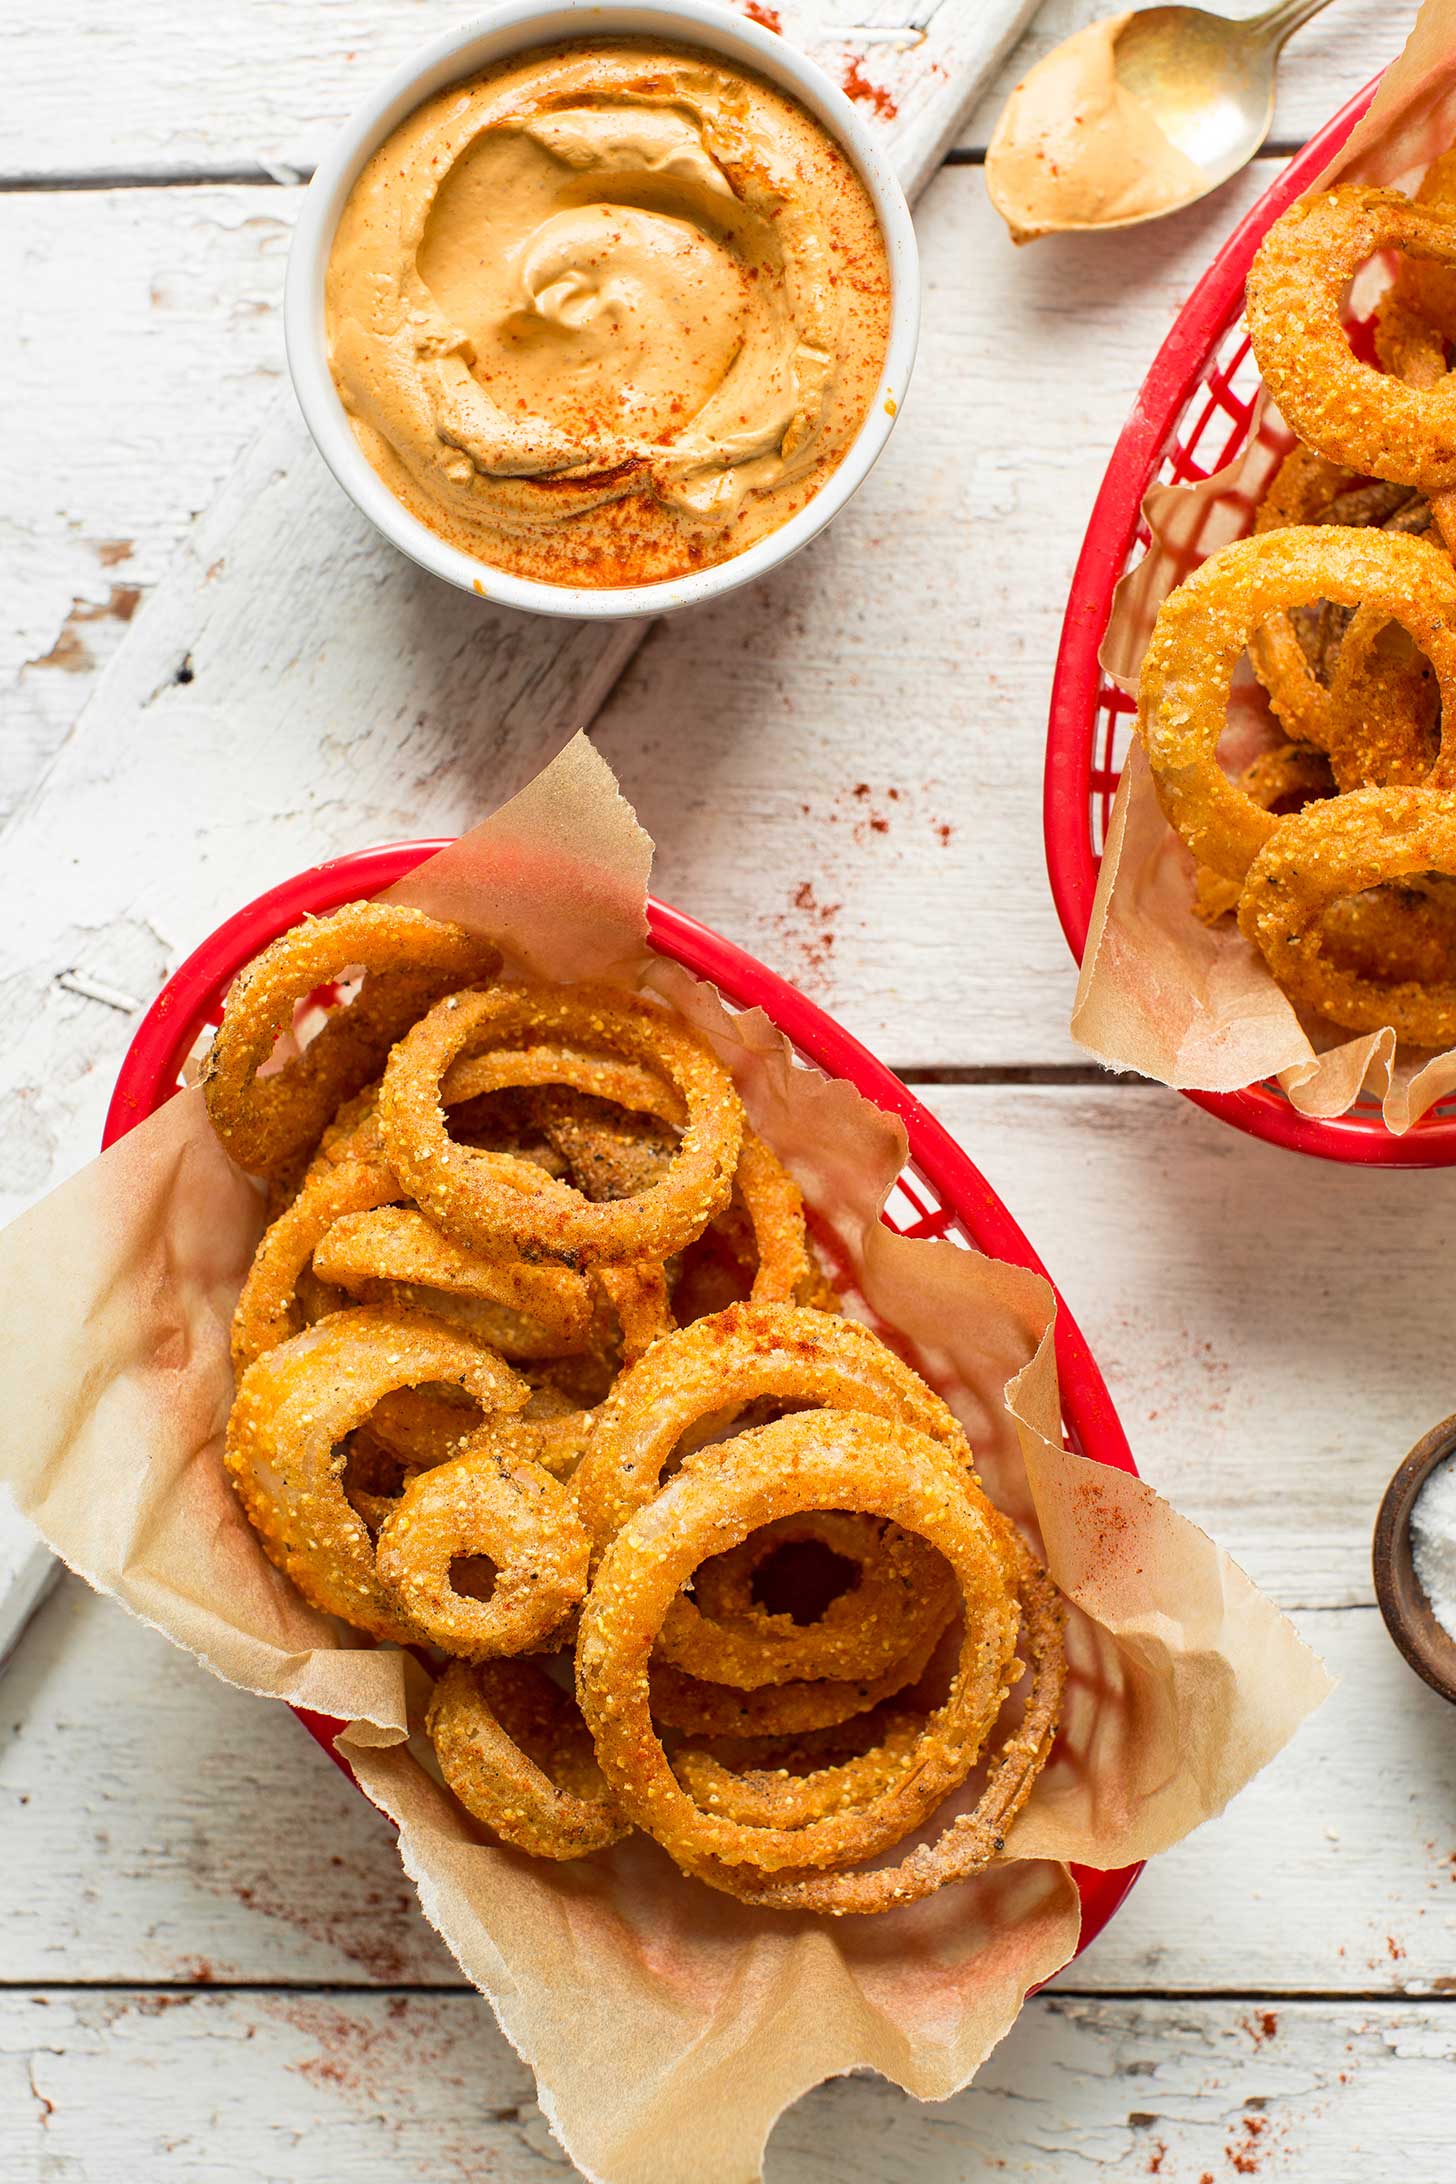 Two bowls of crispy gluten-free Onion Rings and a side of vegan Chipotle Aioli